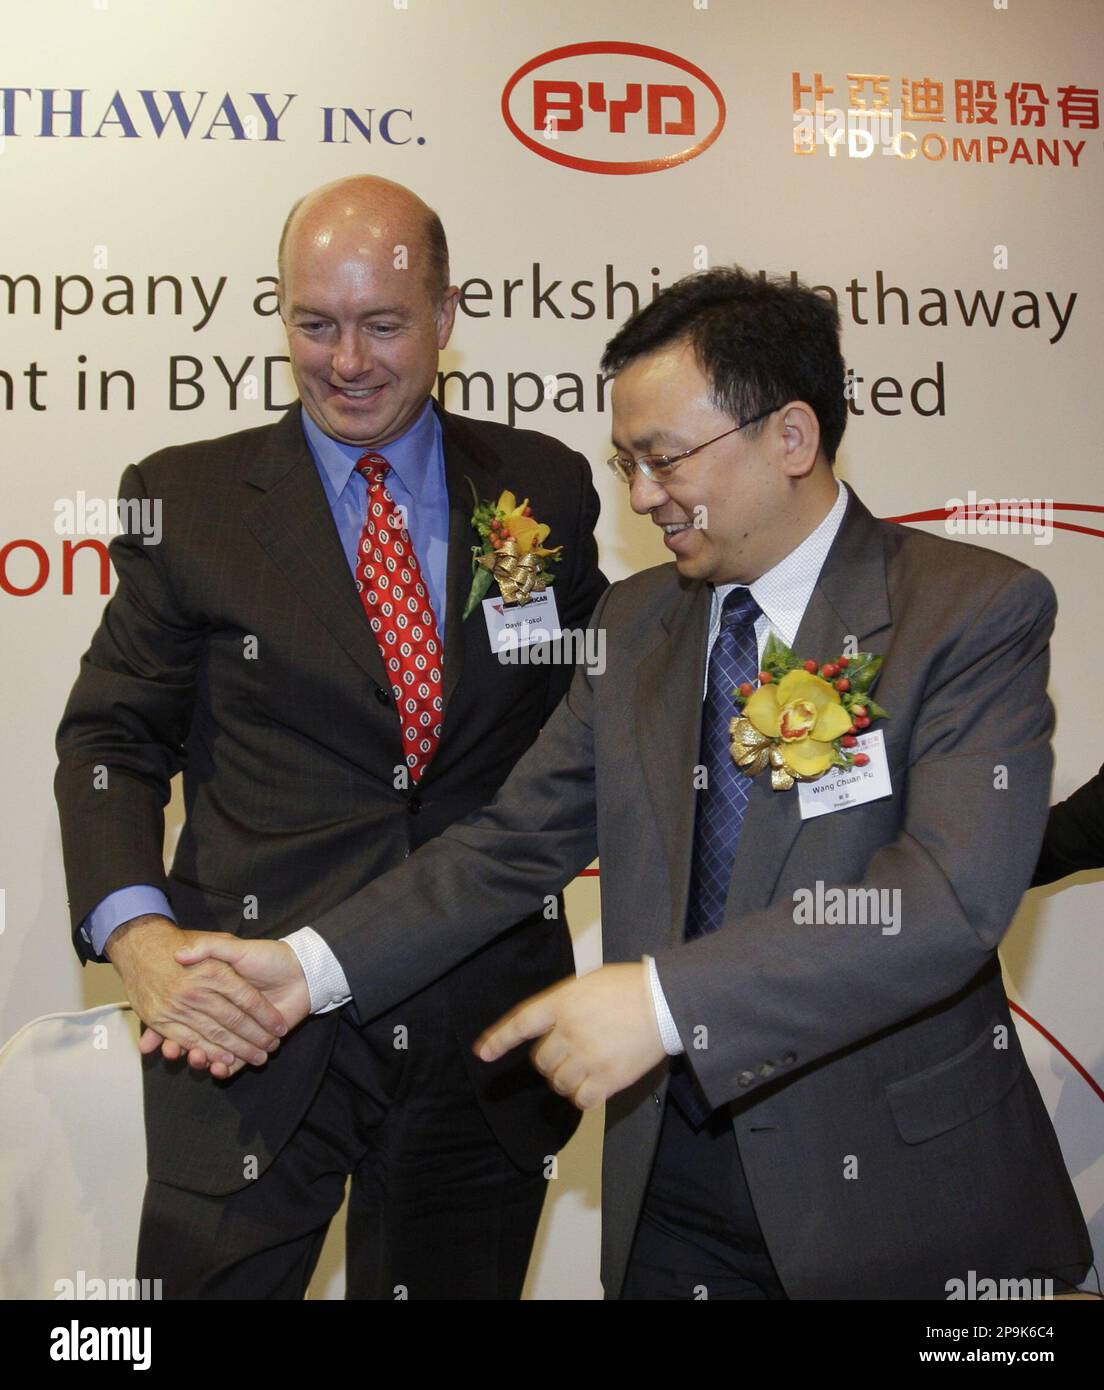 David Sokol, left, chairman of MidAmerican Energy Holding Comapny, shakes hands with Wang Chuanfu, president of BYD Company Limited, during their joint press conference in Hong Kong Monday, Sept. 29, 2008. MidAmerican Energy Holding Company and Berkshire Hathaway announced strategic investment in BYD Company Limited. AP Photo/Kin Cheung) Stock Photo